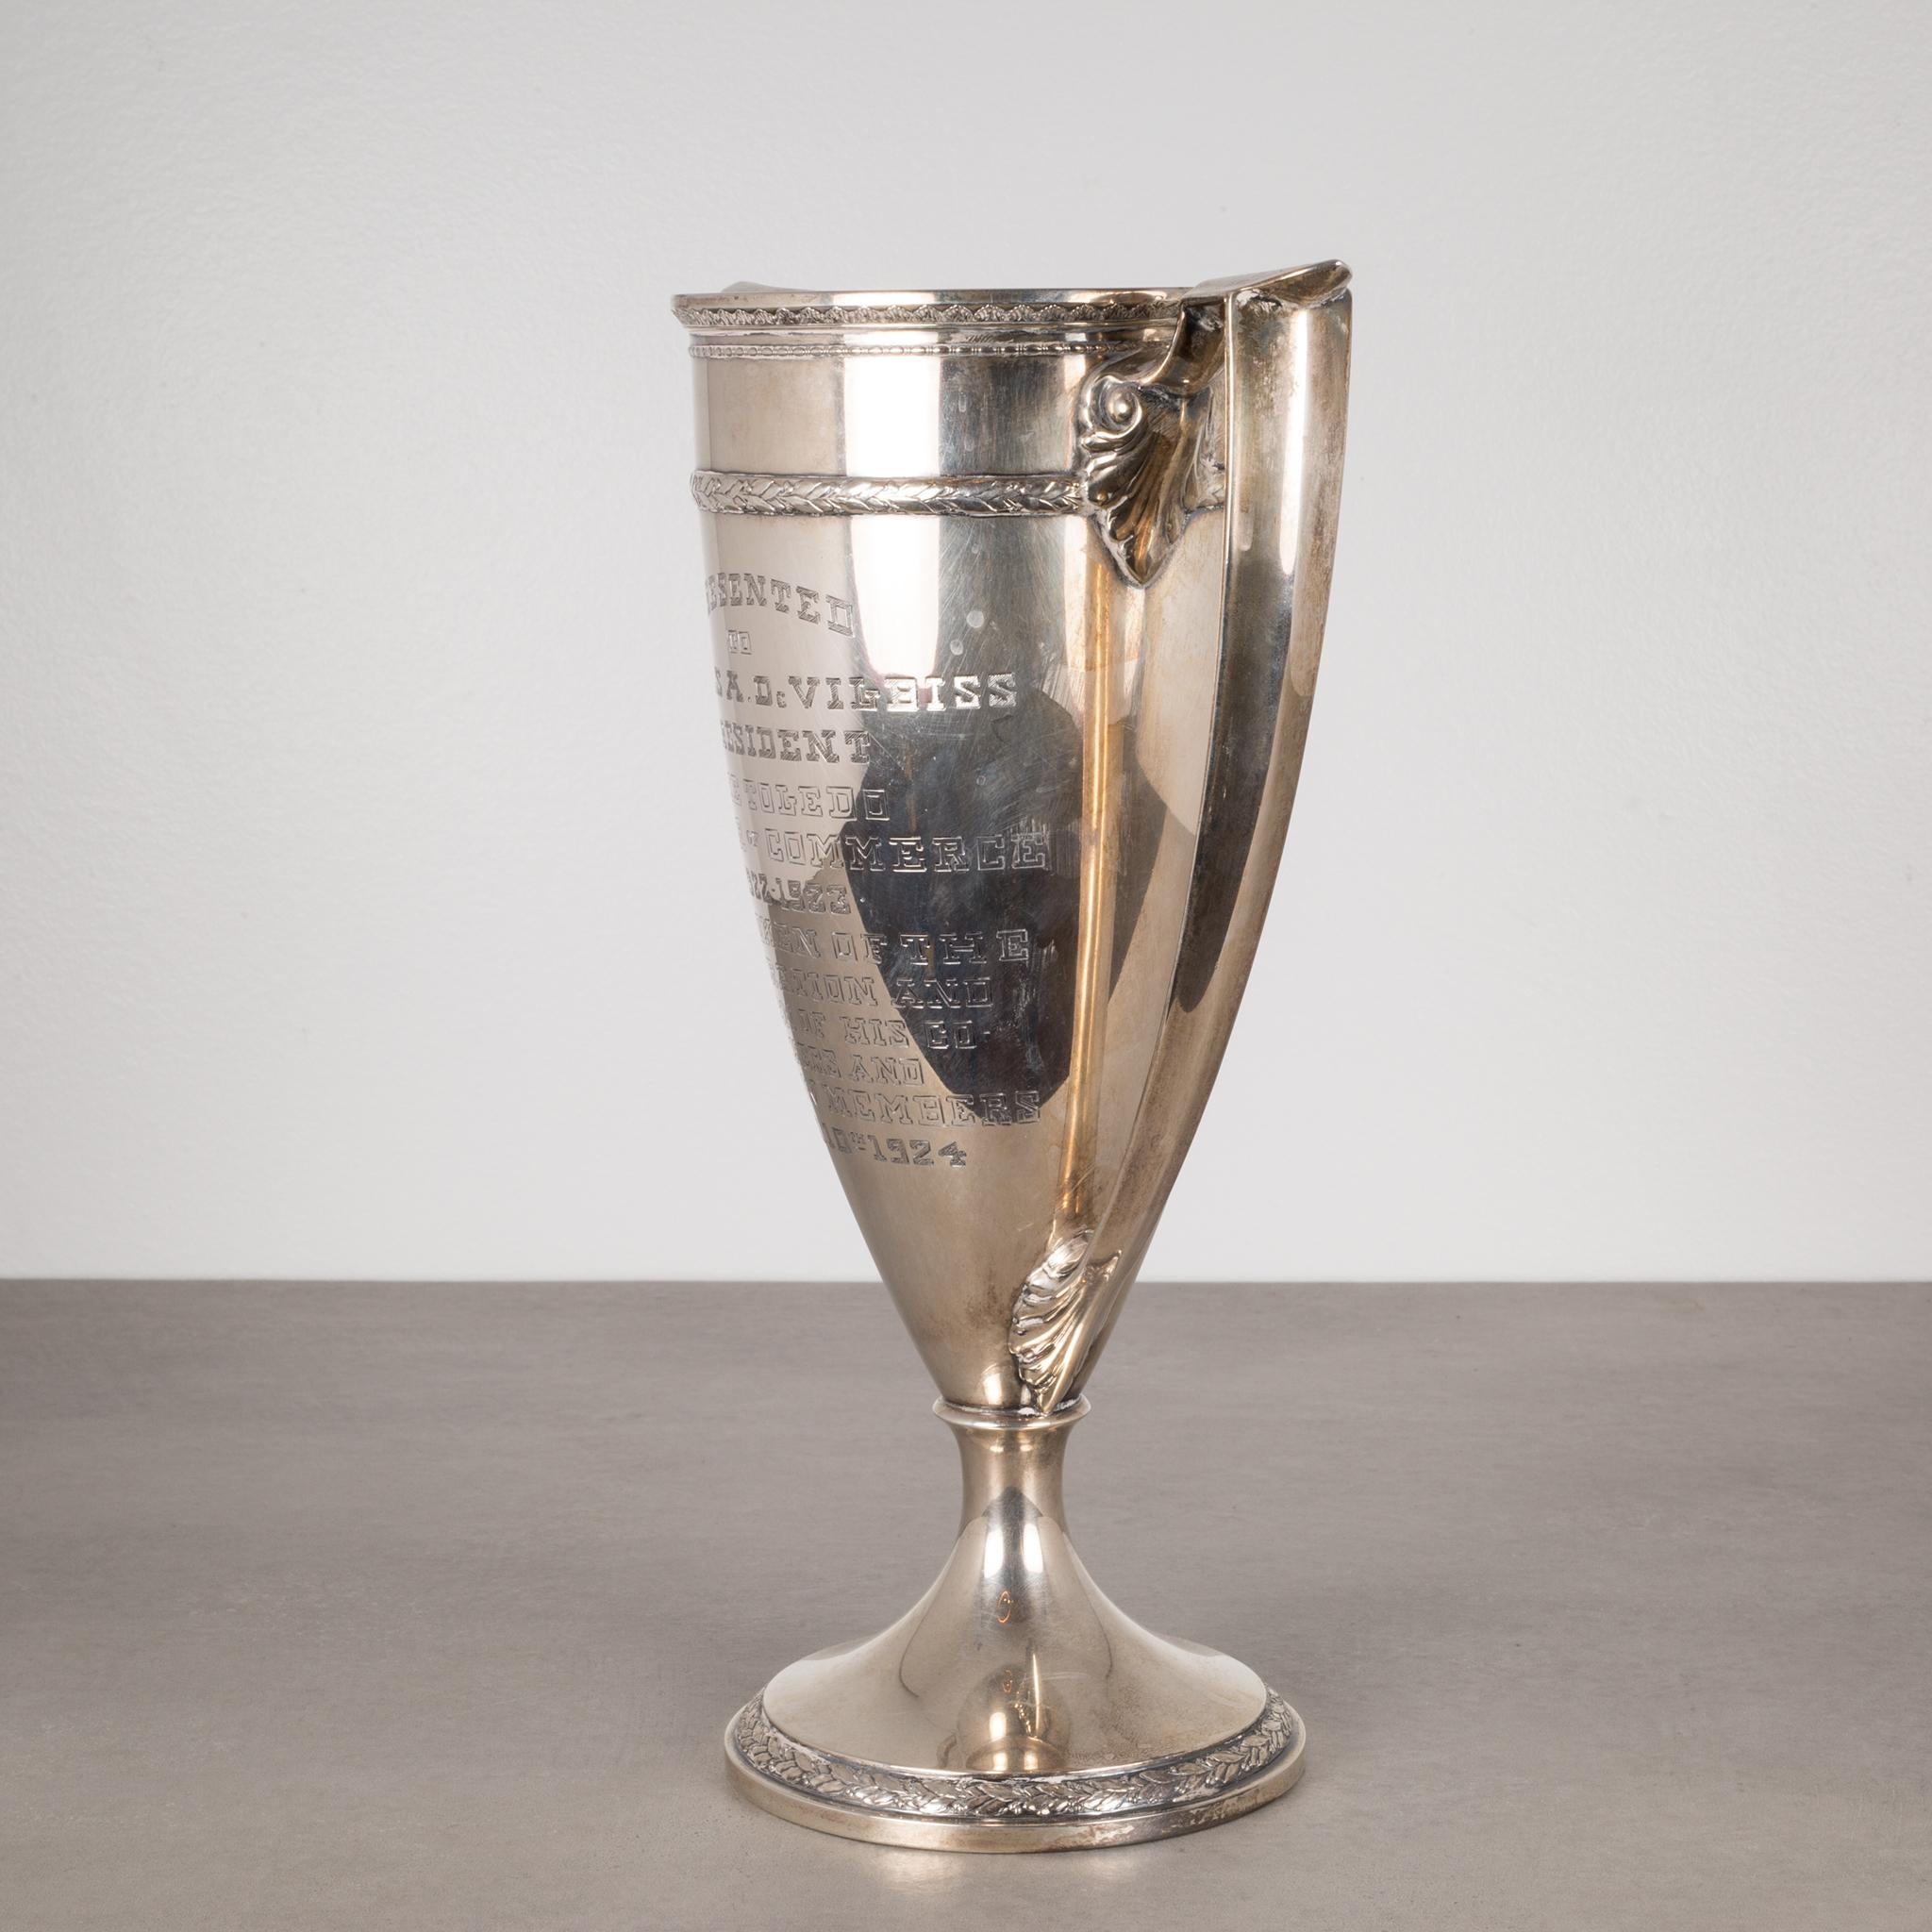 ABOUT

This is an original Art Deco trophy This large cup trophy is stamped 